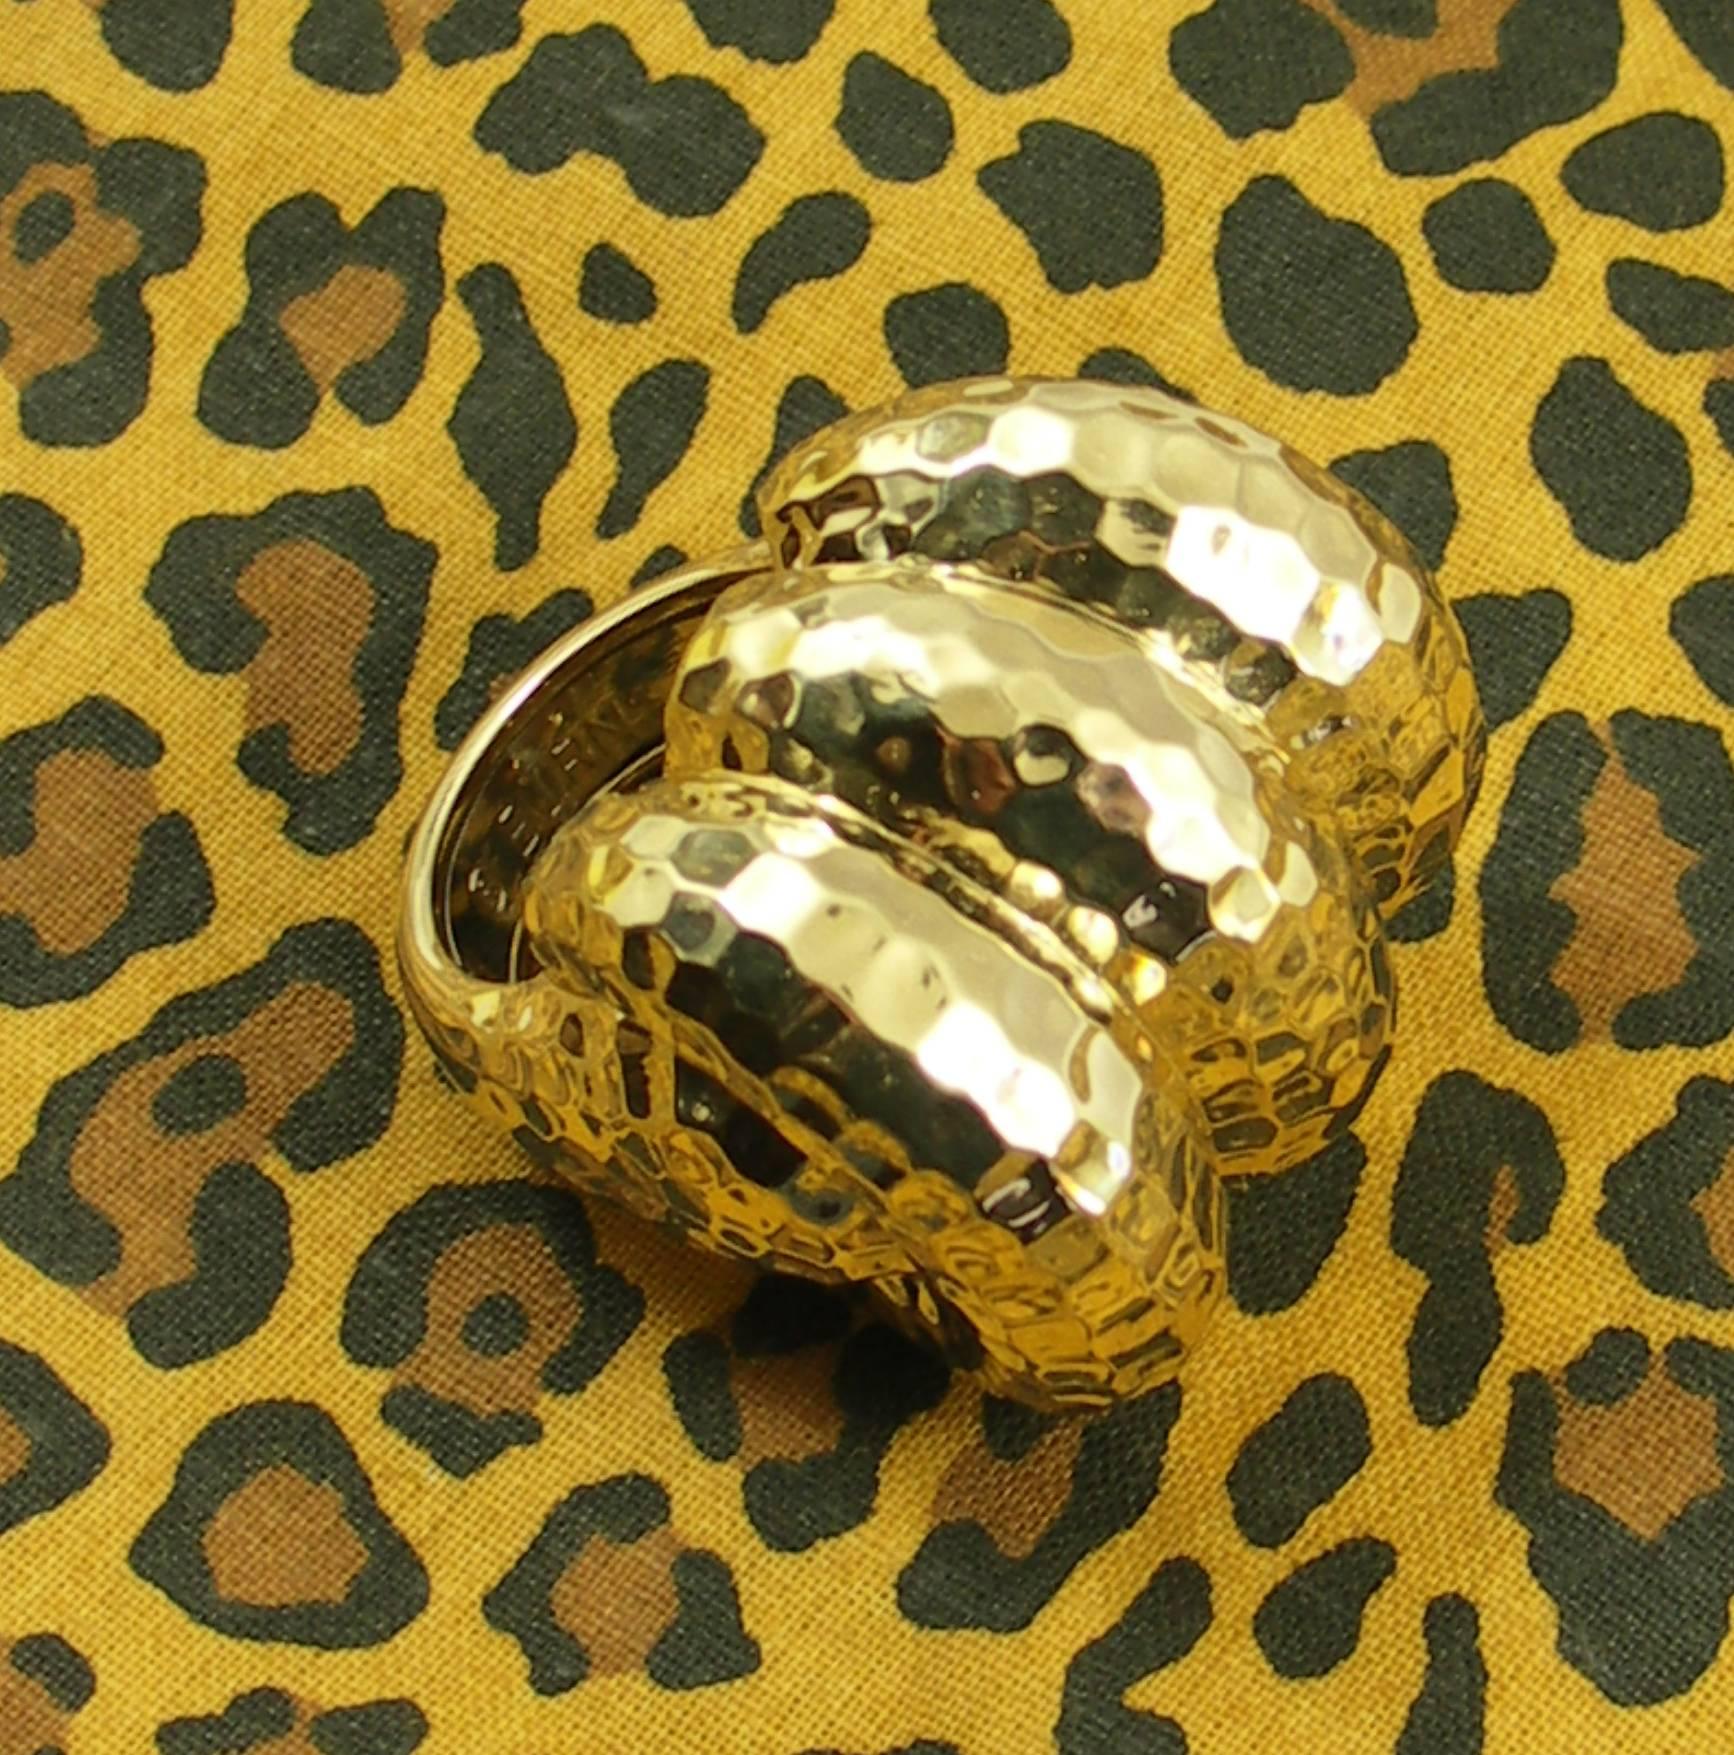 A Large ring measuring 1 inch long, 1 1/4 inches wide, and rising 2/3 of an inch above the finger. A hammer finish is added to this 18K yellow gold ring, to give it a rich golden appearance.